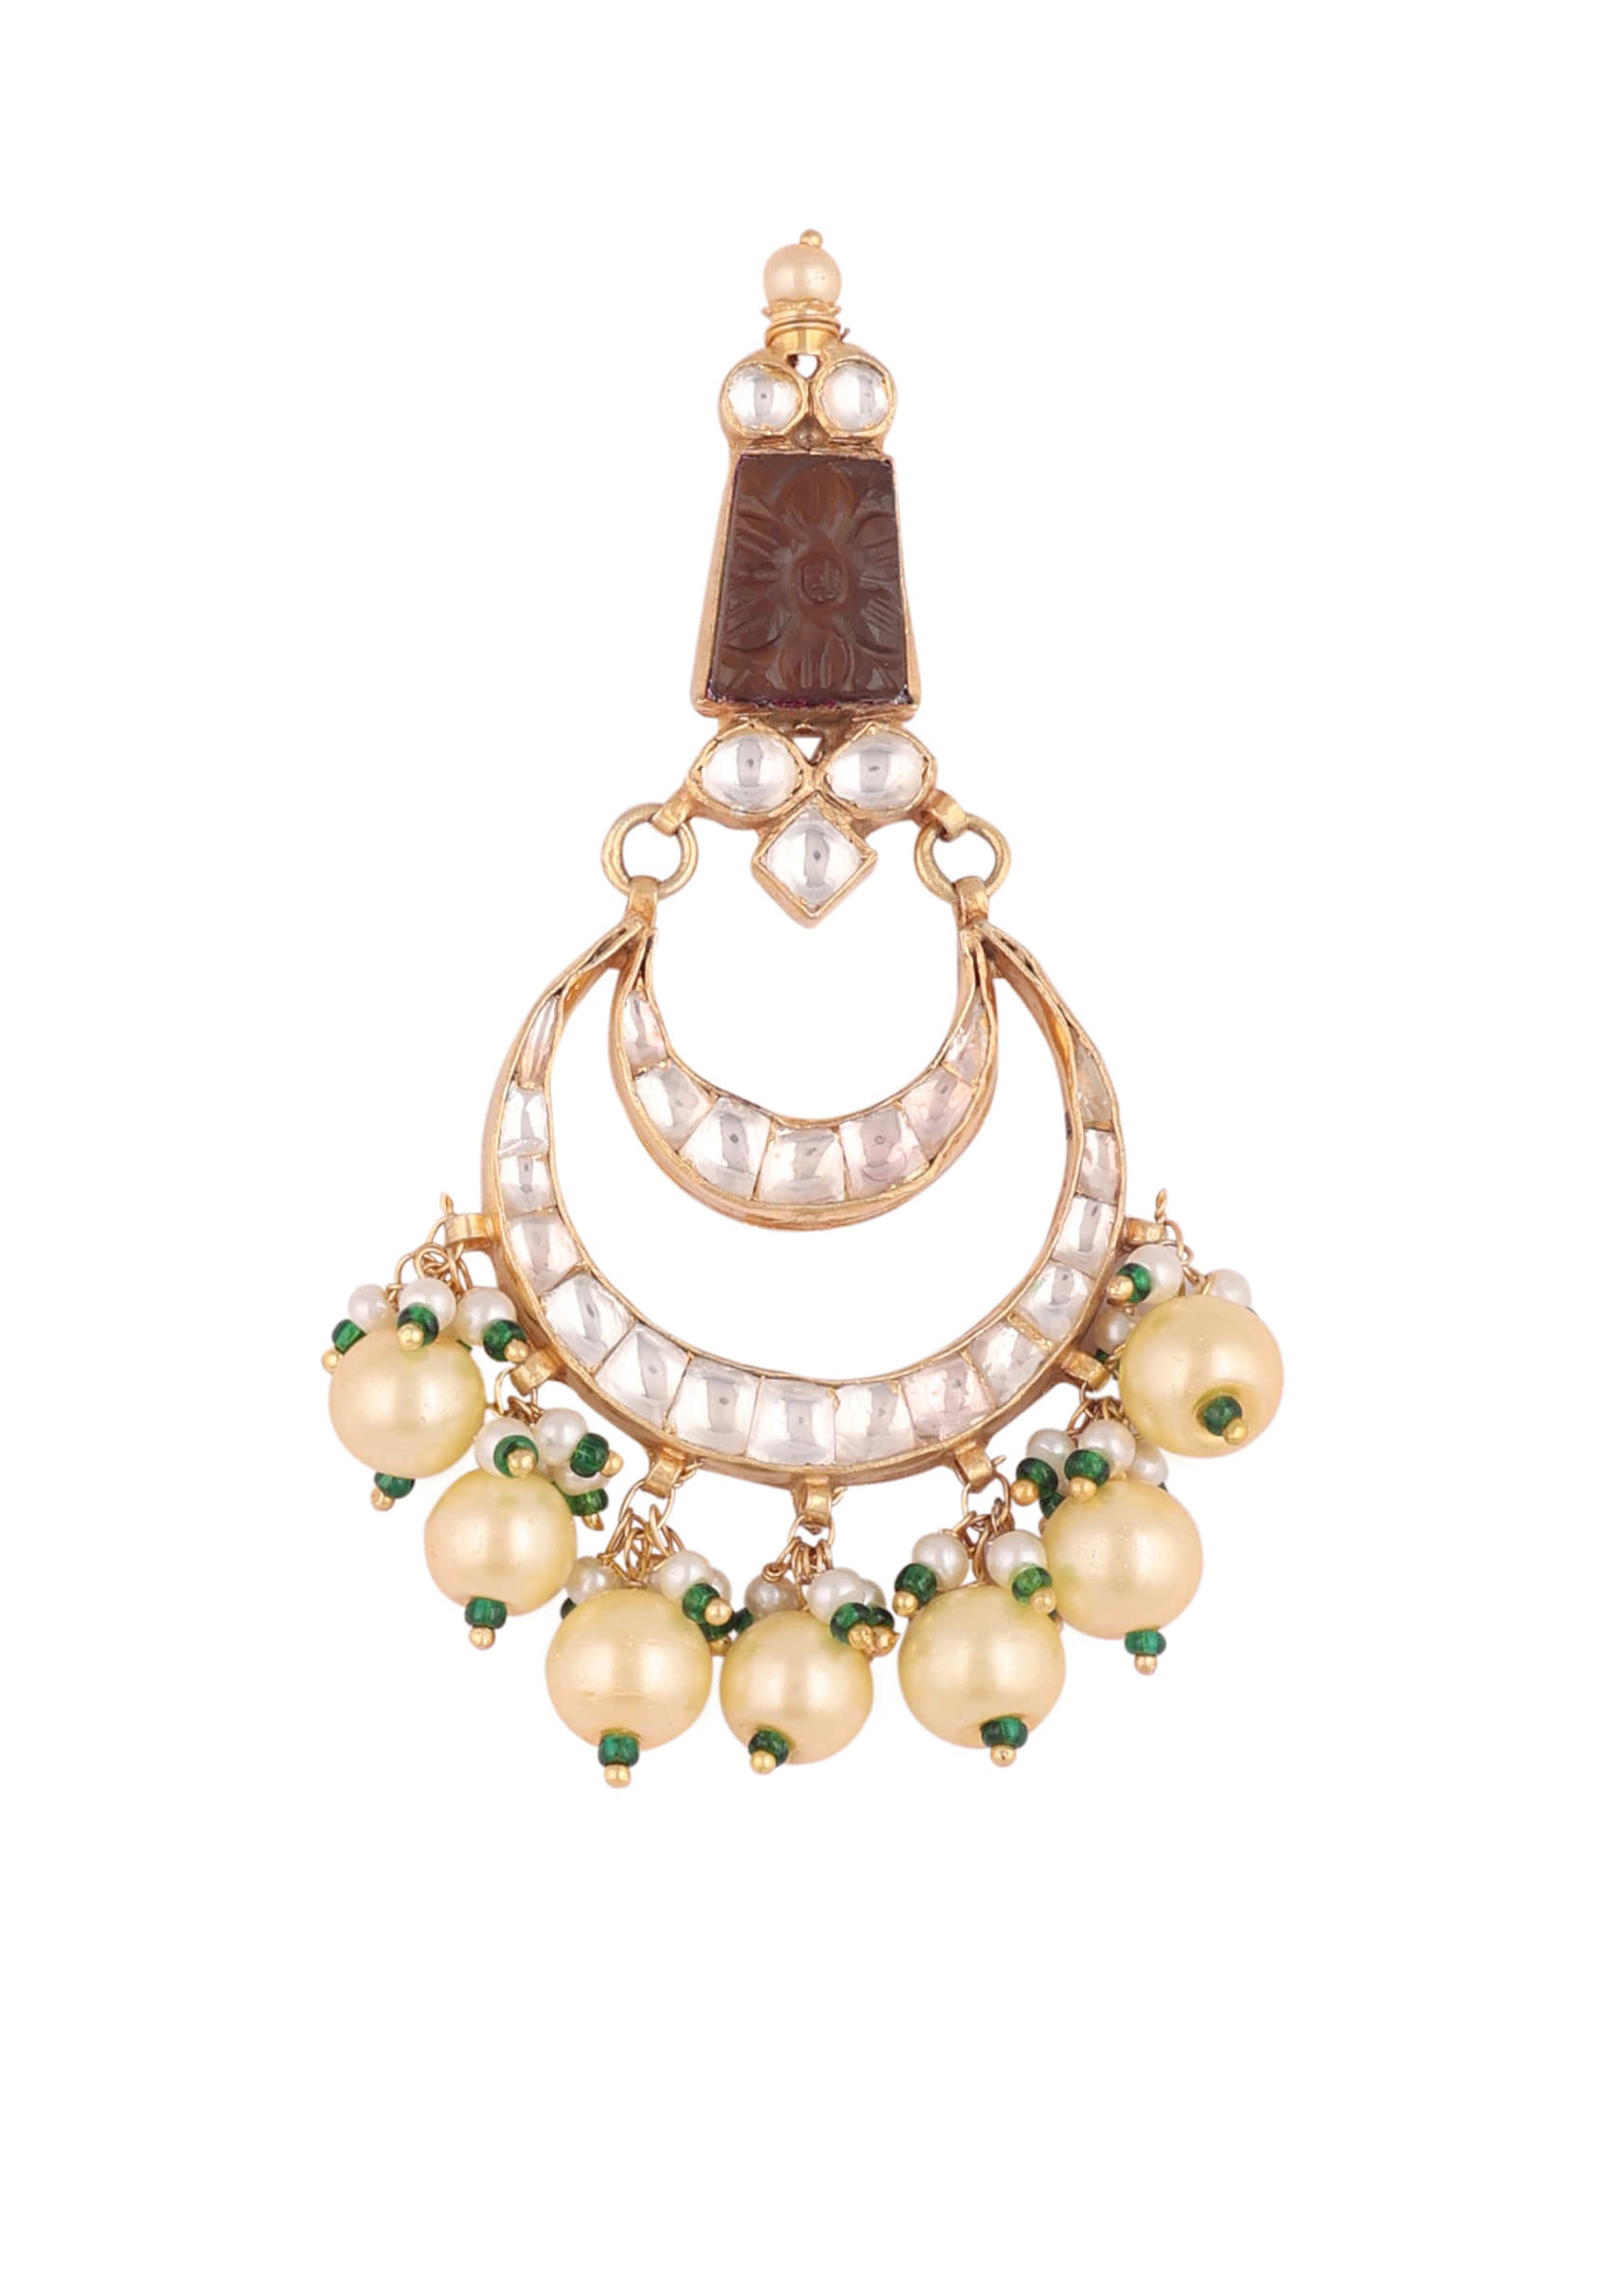 Gold Finish Kundan Polki Multicolor Short Necklace Set With Pearls And Green Beads